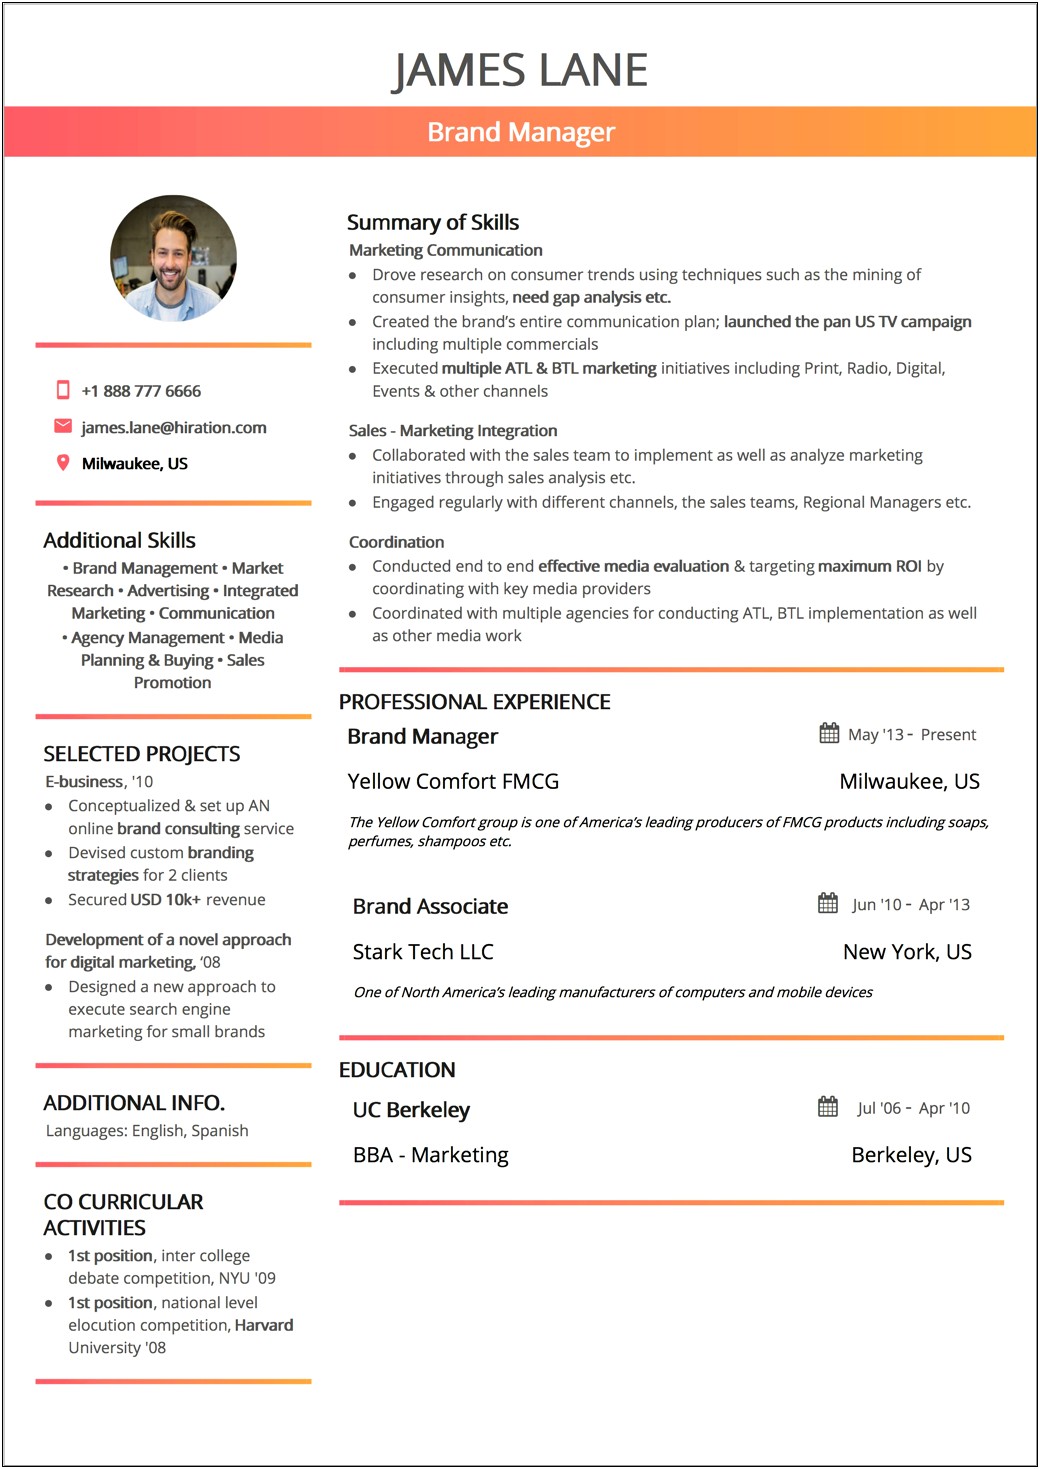 Updating Resume With Job Promotion